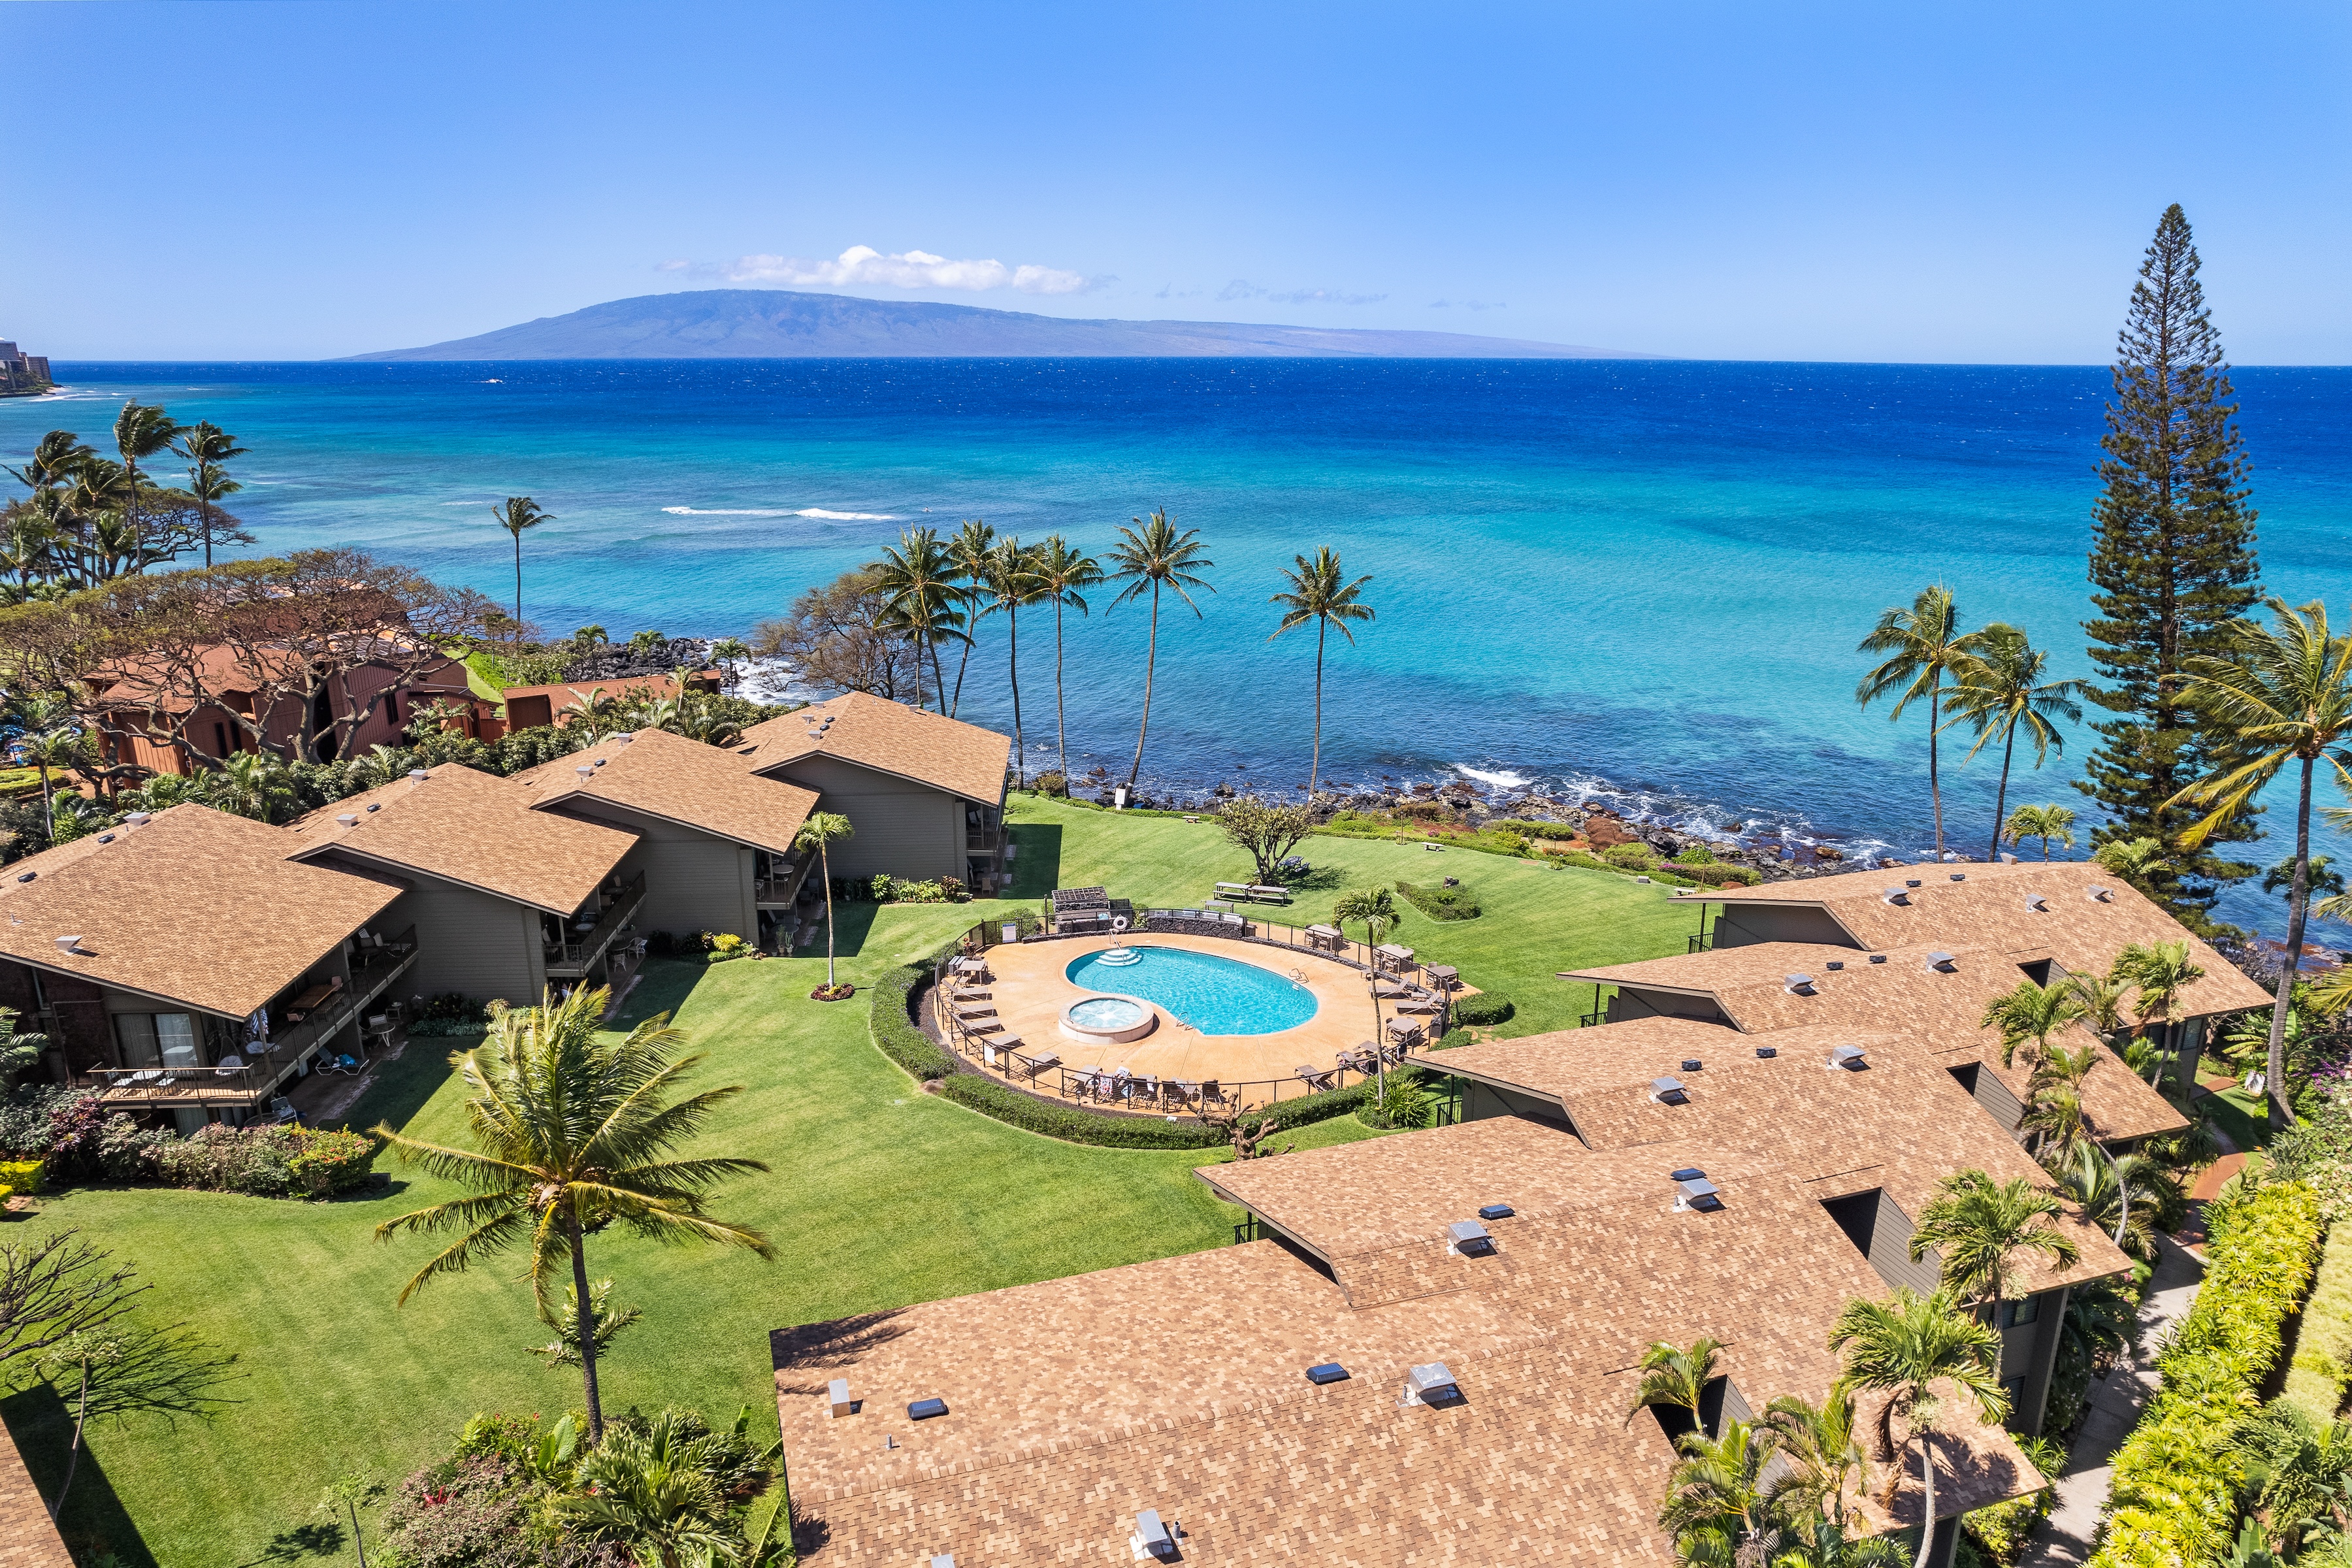 Find your happy place on the West Maui coast